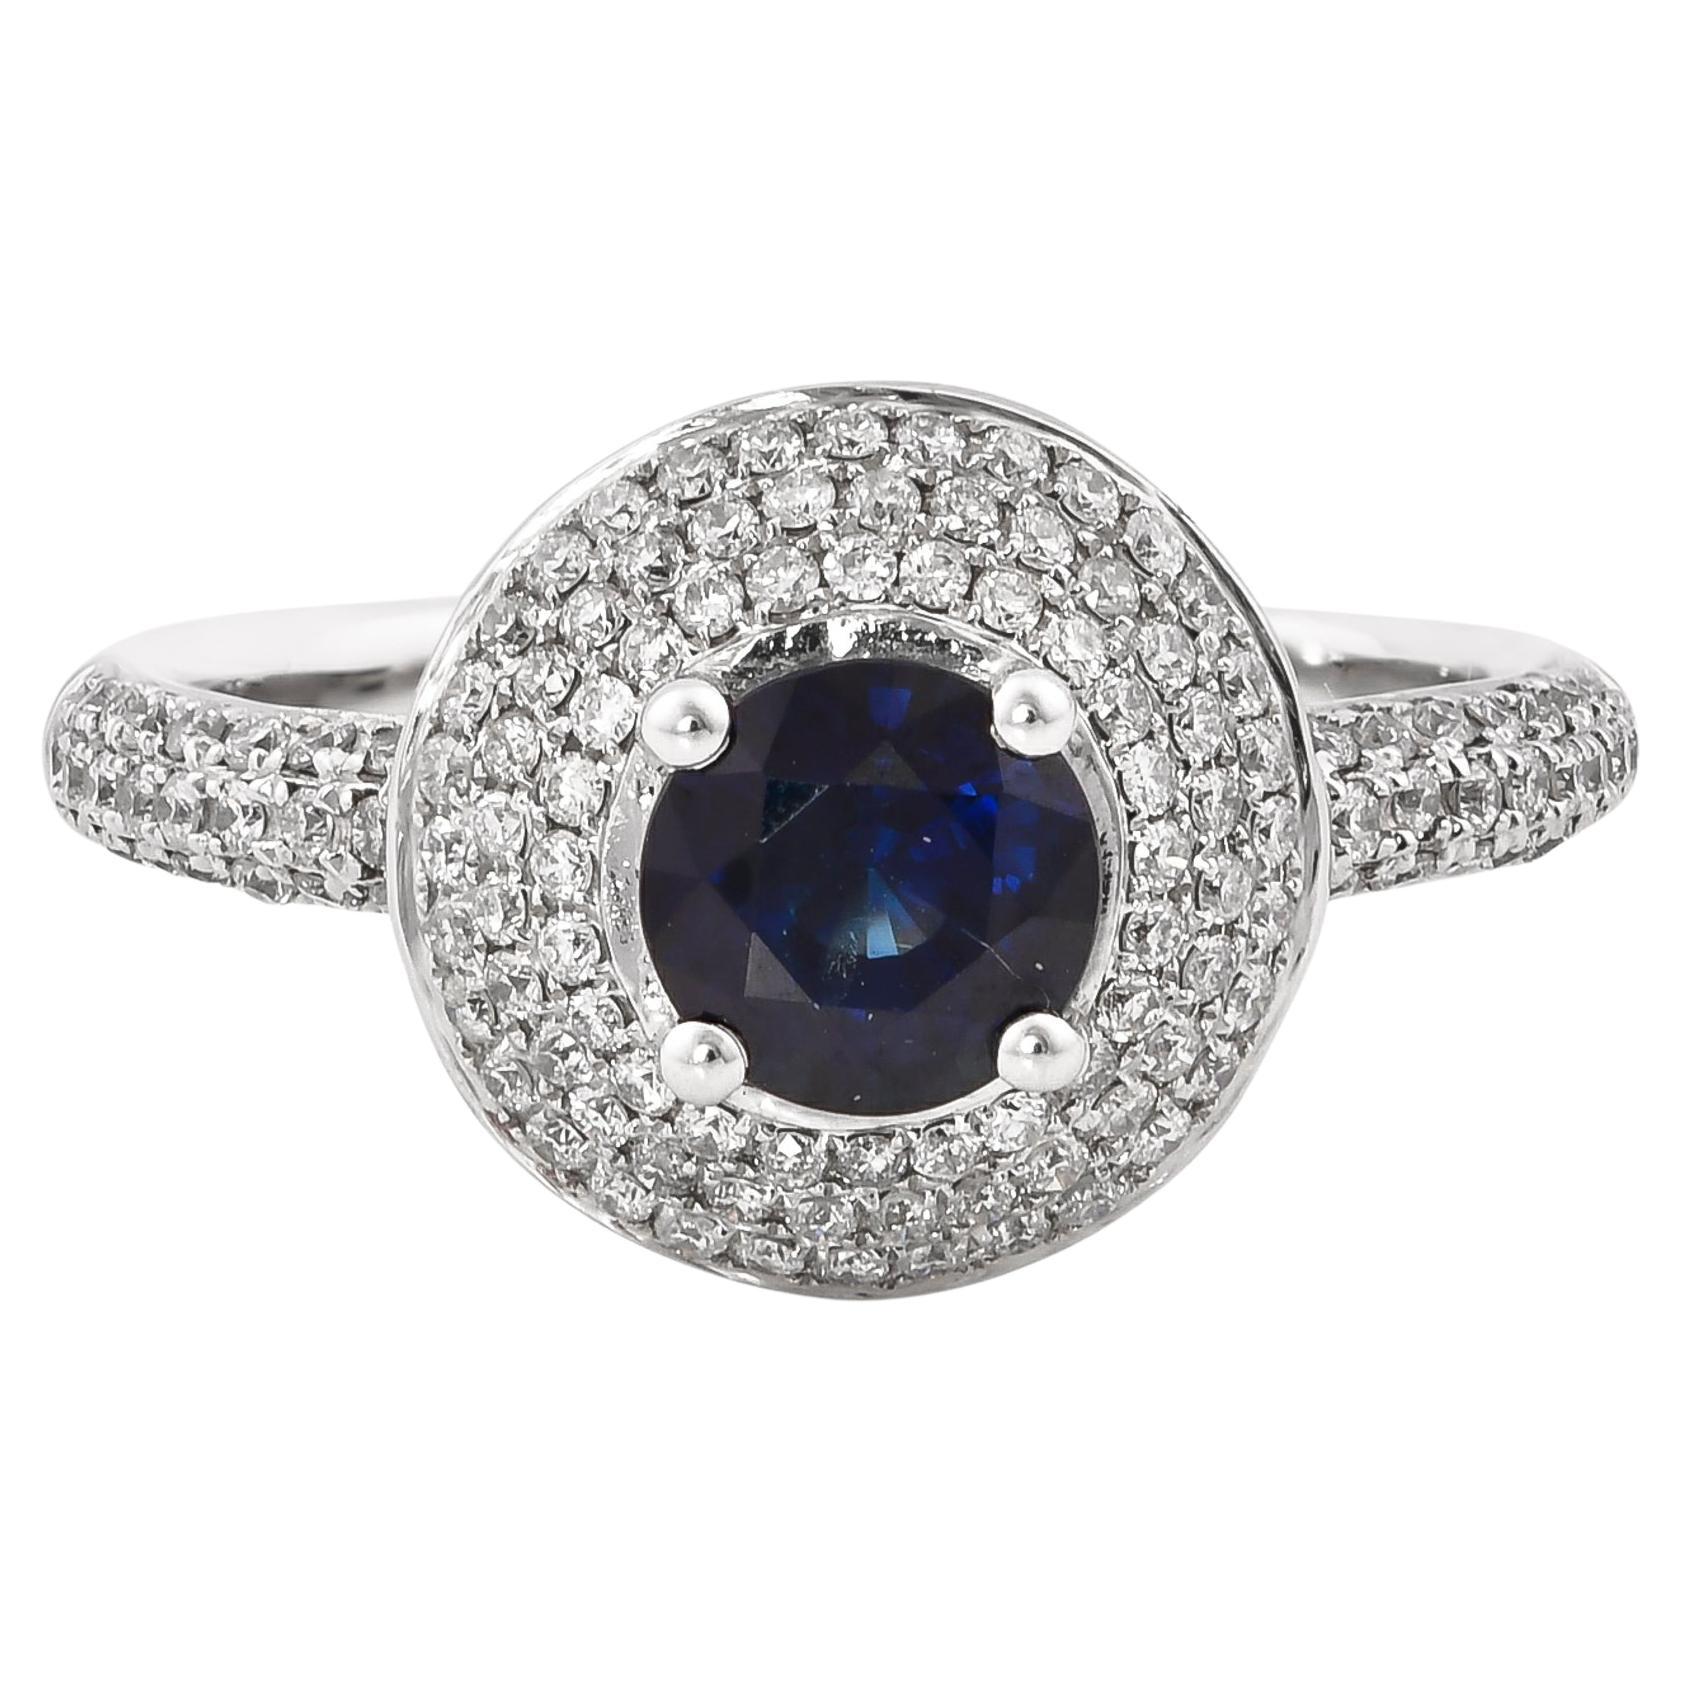 1.0 Carat Blue Sapphire and White Diamond Ring in 14 Karat White Gold For Sale